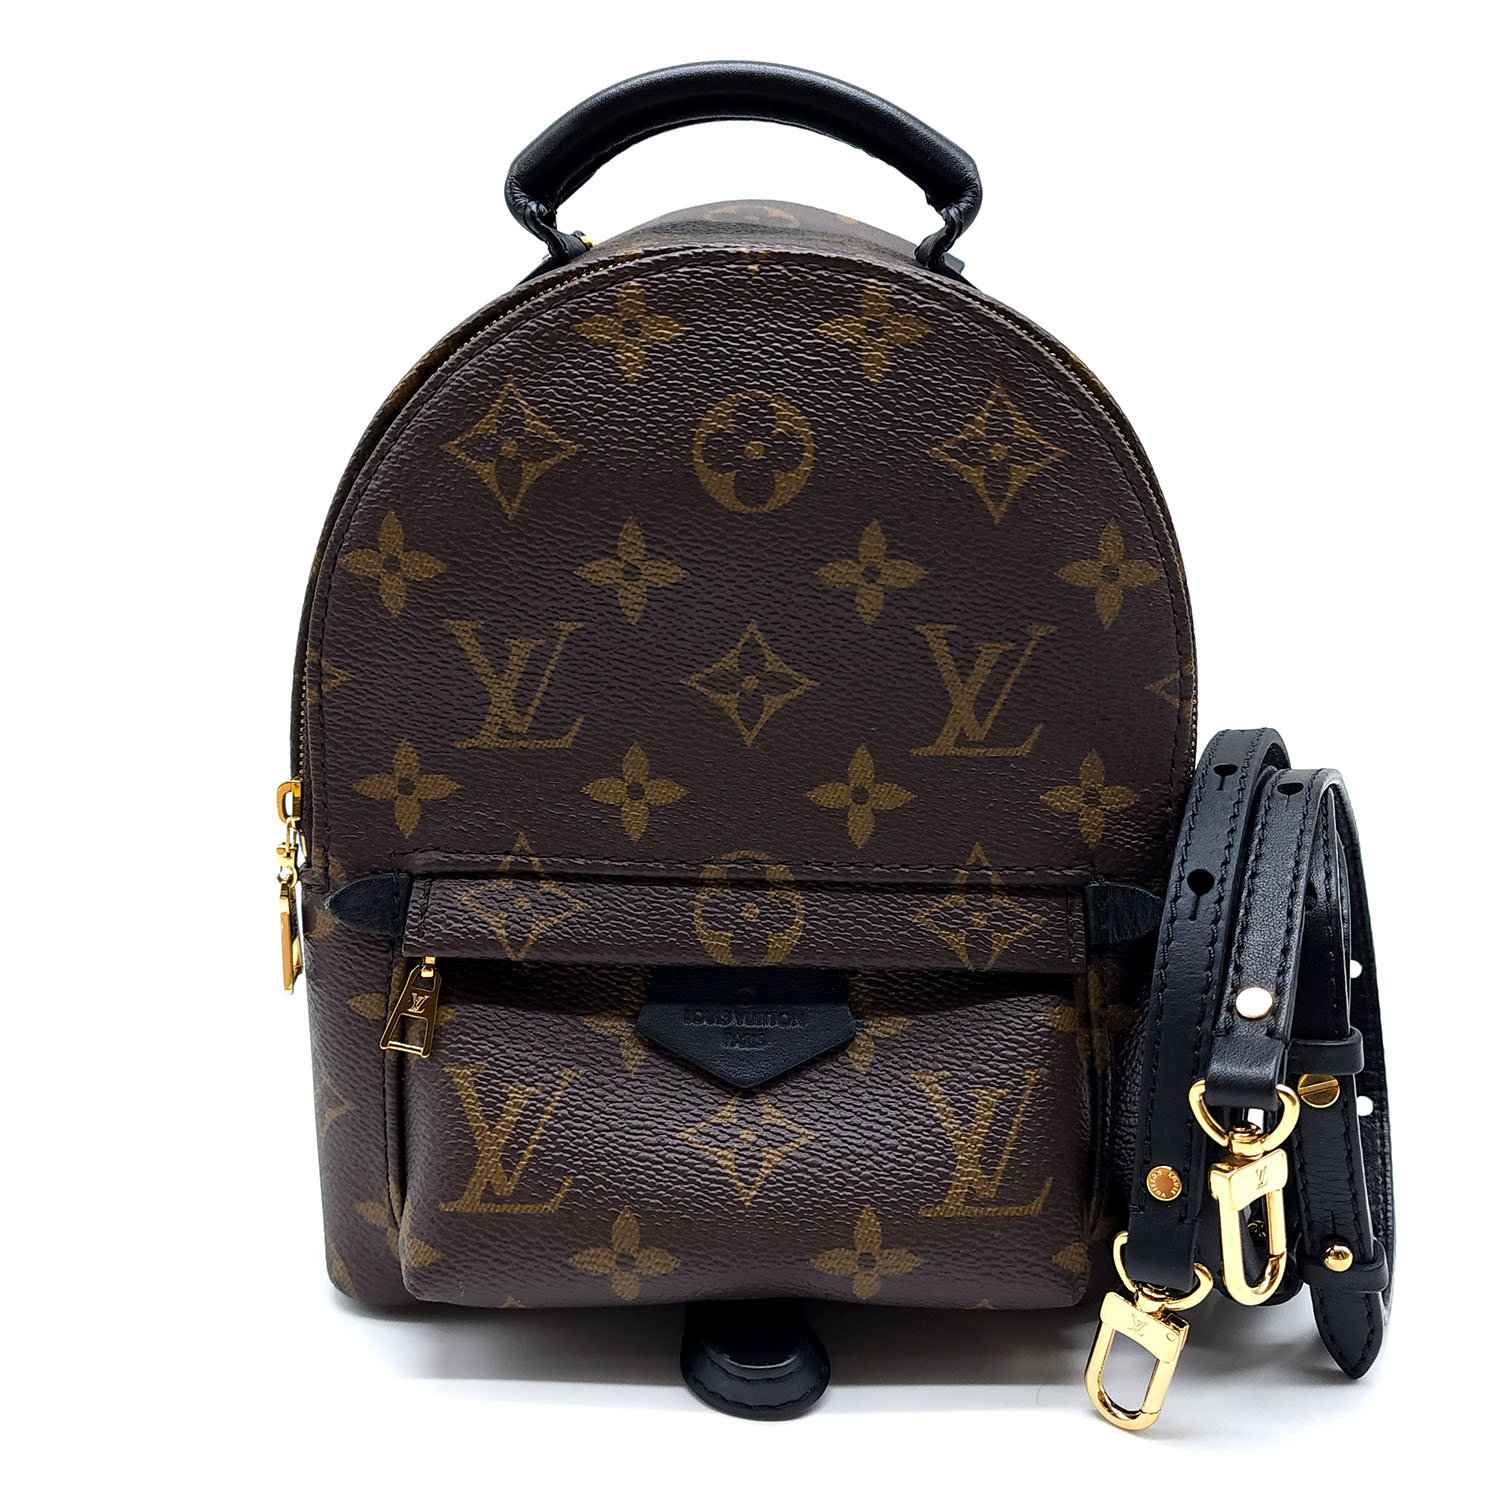 Louis Vuitton Monogram Mini Palm Springs Backpack⁣ – Coco Approved Studio